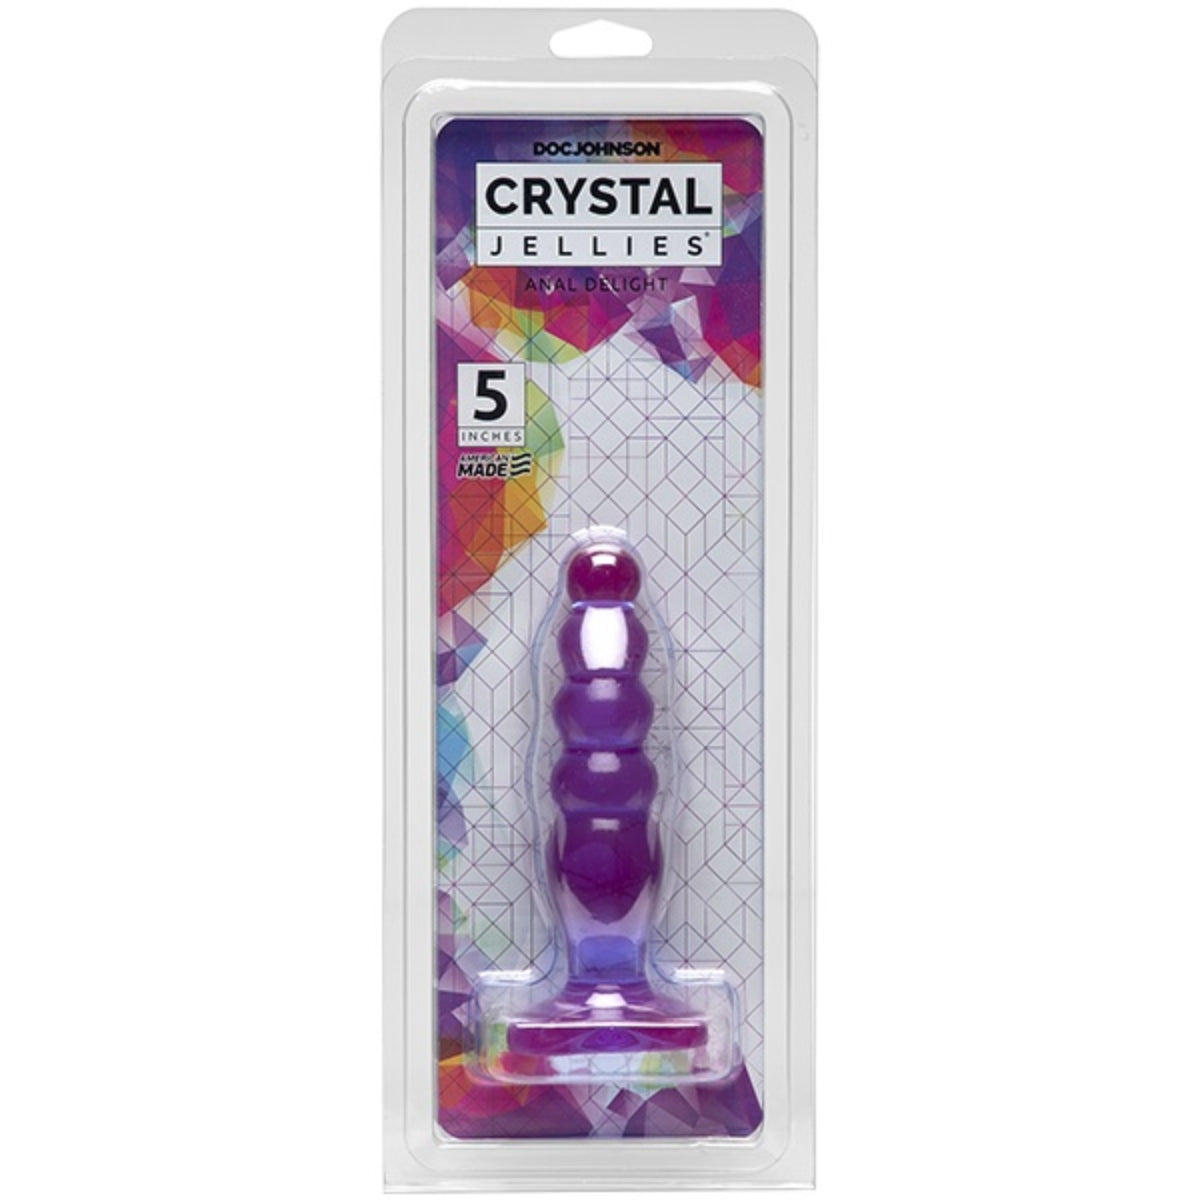 Crystal Jellies Anal Delight Butt Plug Purple 5 Inch